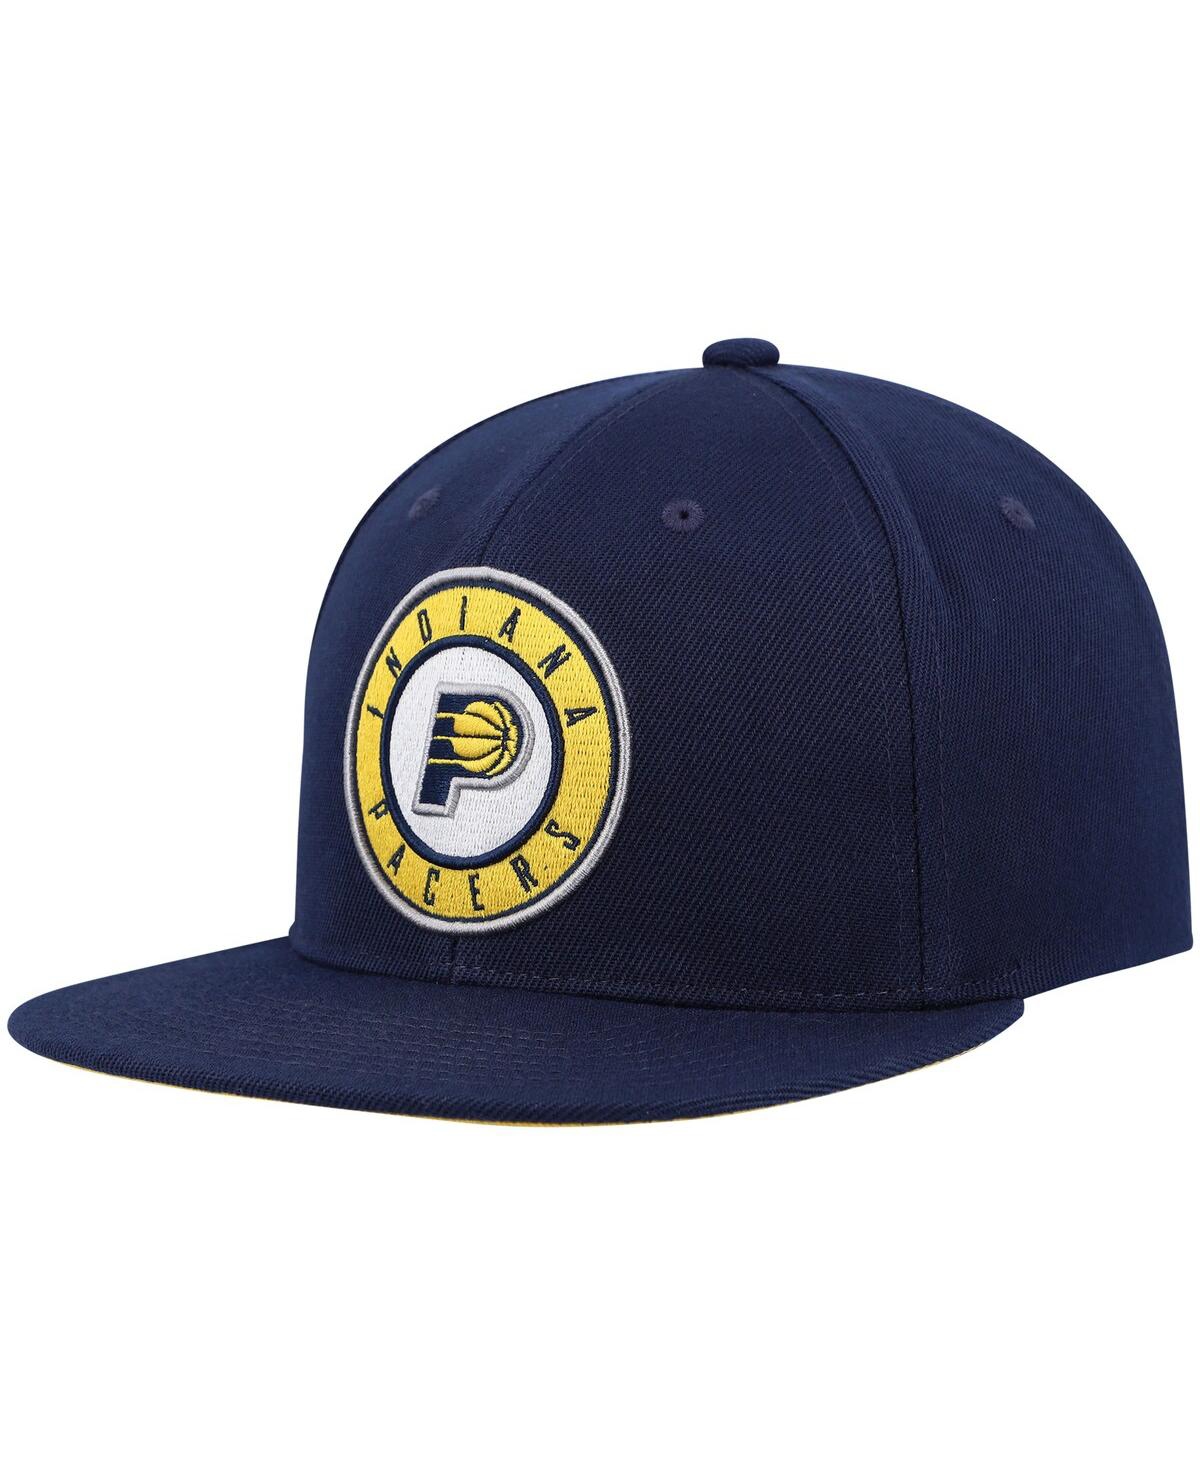 Shop Mitchell & Ness Men's  Navy Indiana Pacers Core Side Snapback Hat